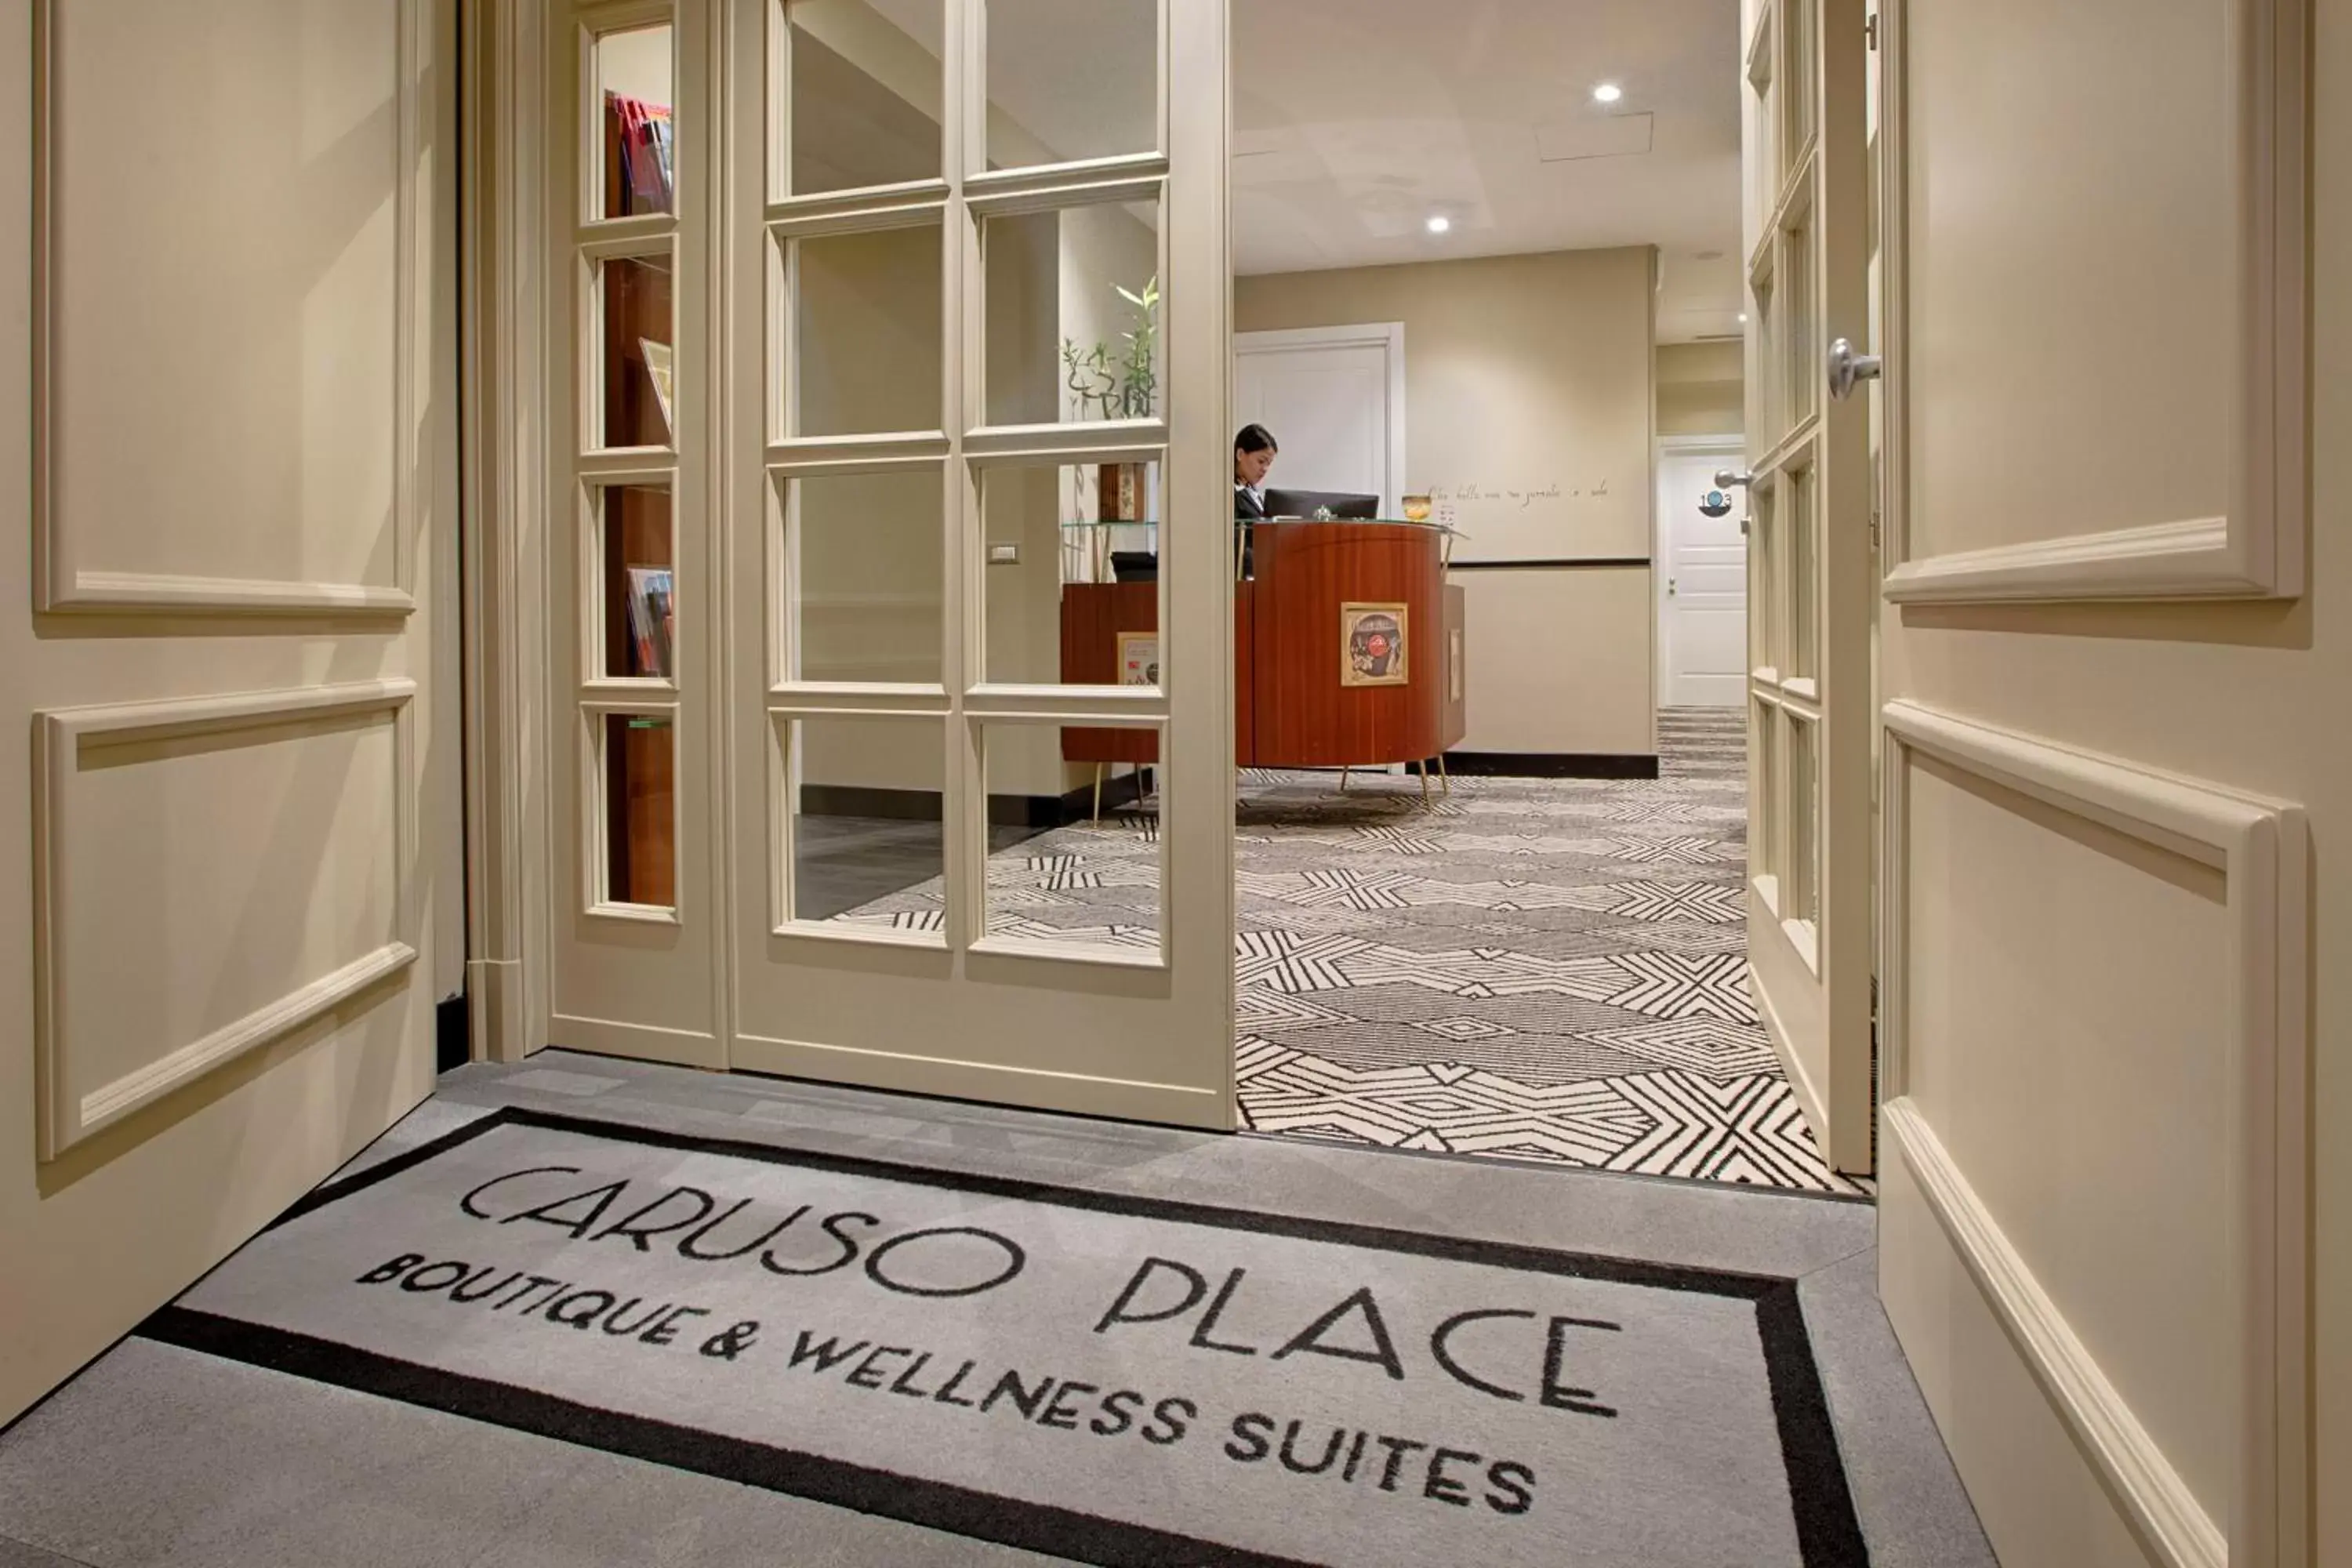 Lobby or reception in Caruso Place Boutique & Wellness Suites